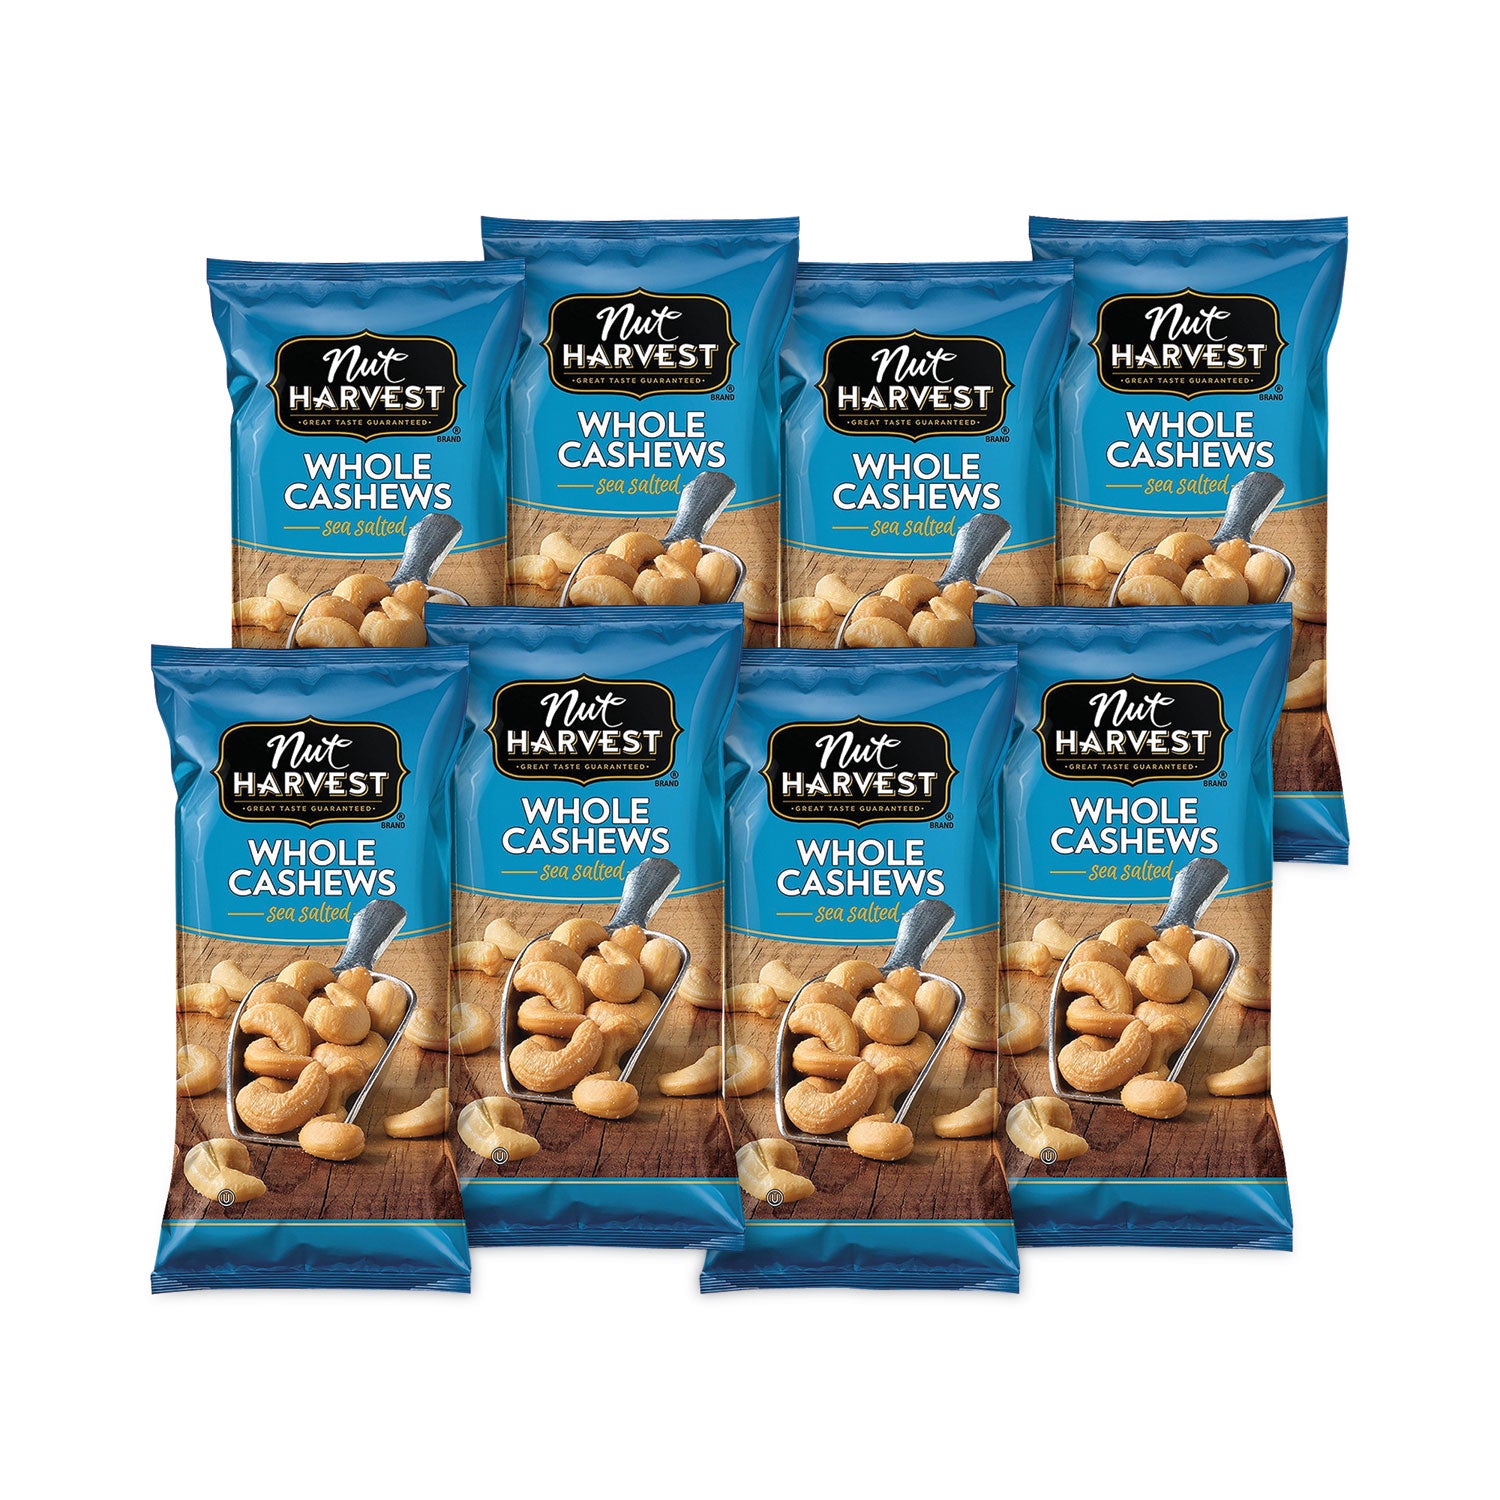 sea-salted-whole-cashews-225-oz-pouch-8-carton-ships-in-1-3-business-days_grr29500004 - 2